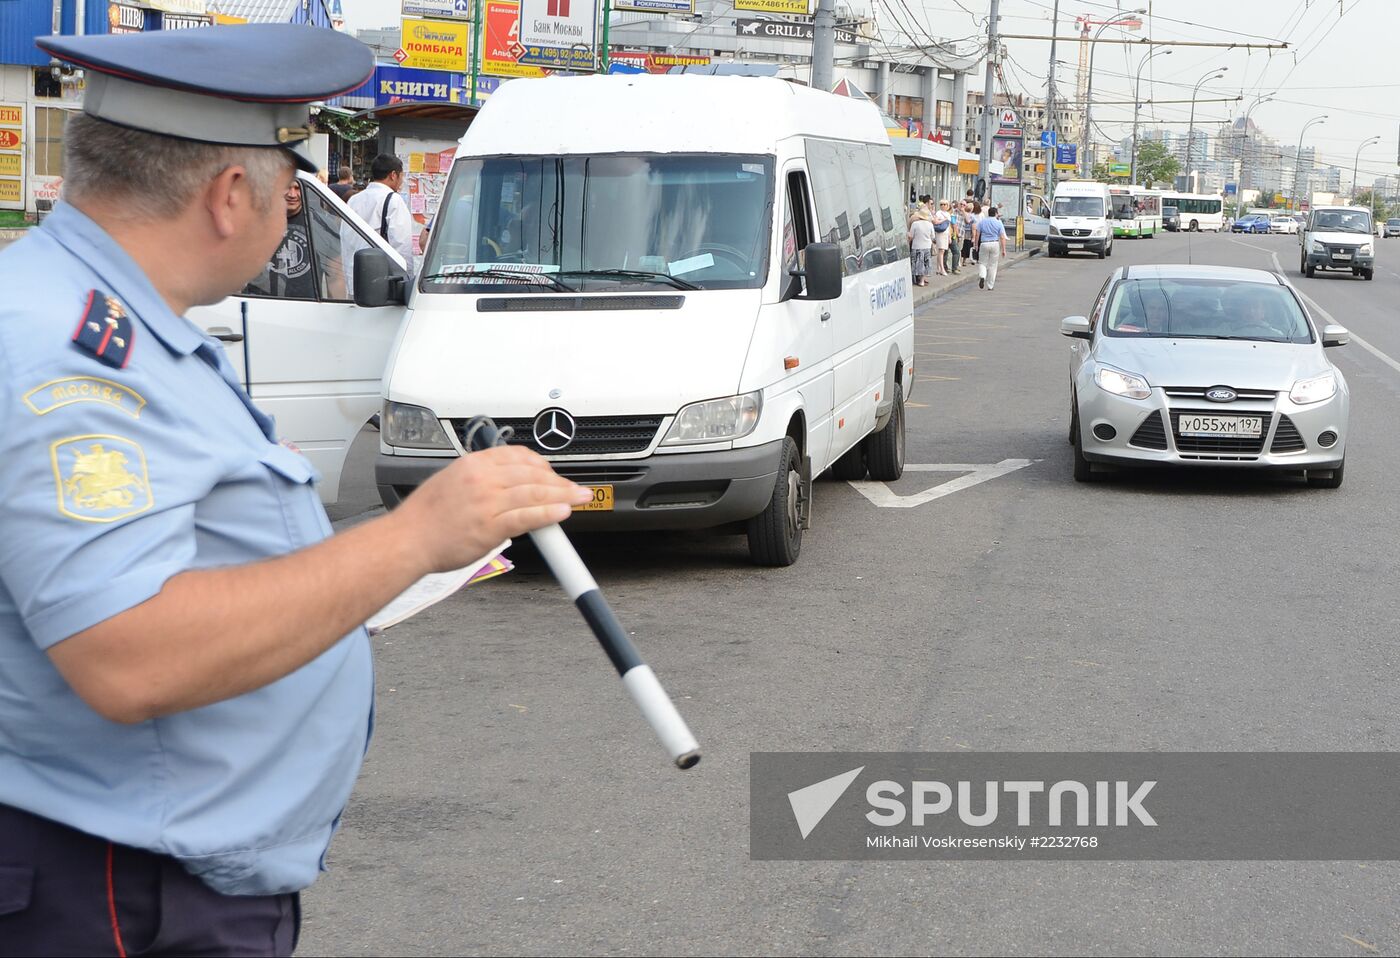 Bus lane violations recorded by police